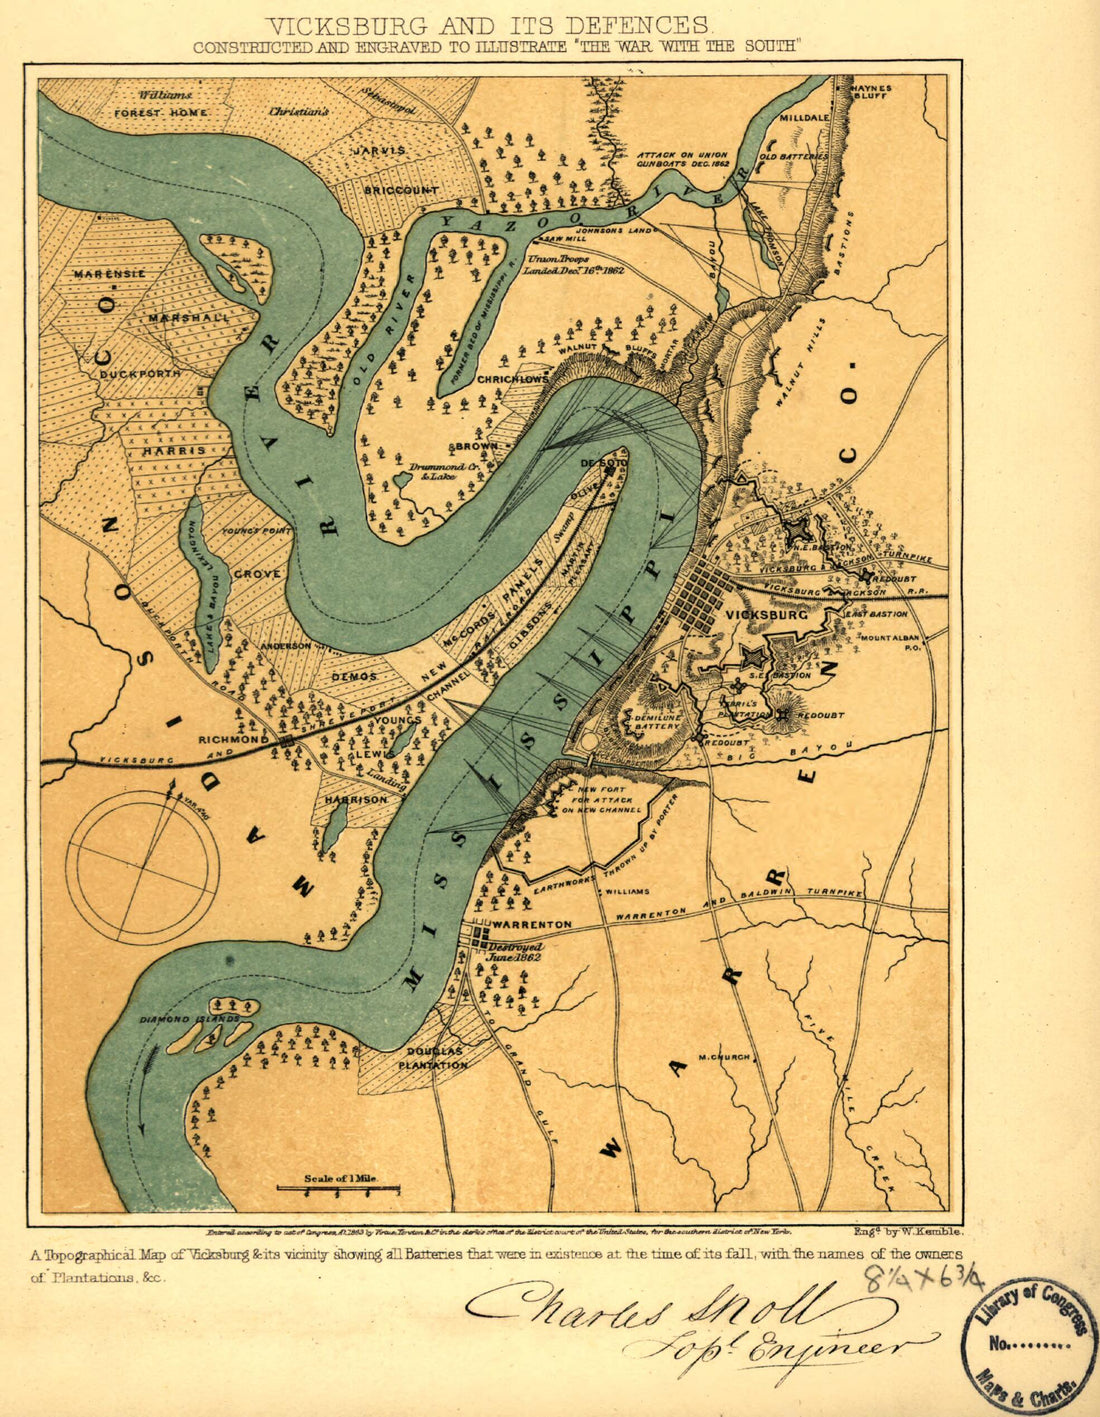 This old map of Vicksburg and Its Defences. Constructed and Engraved to Illustrate The War With the South from 1863 was created by Charles Sholl in 1863